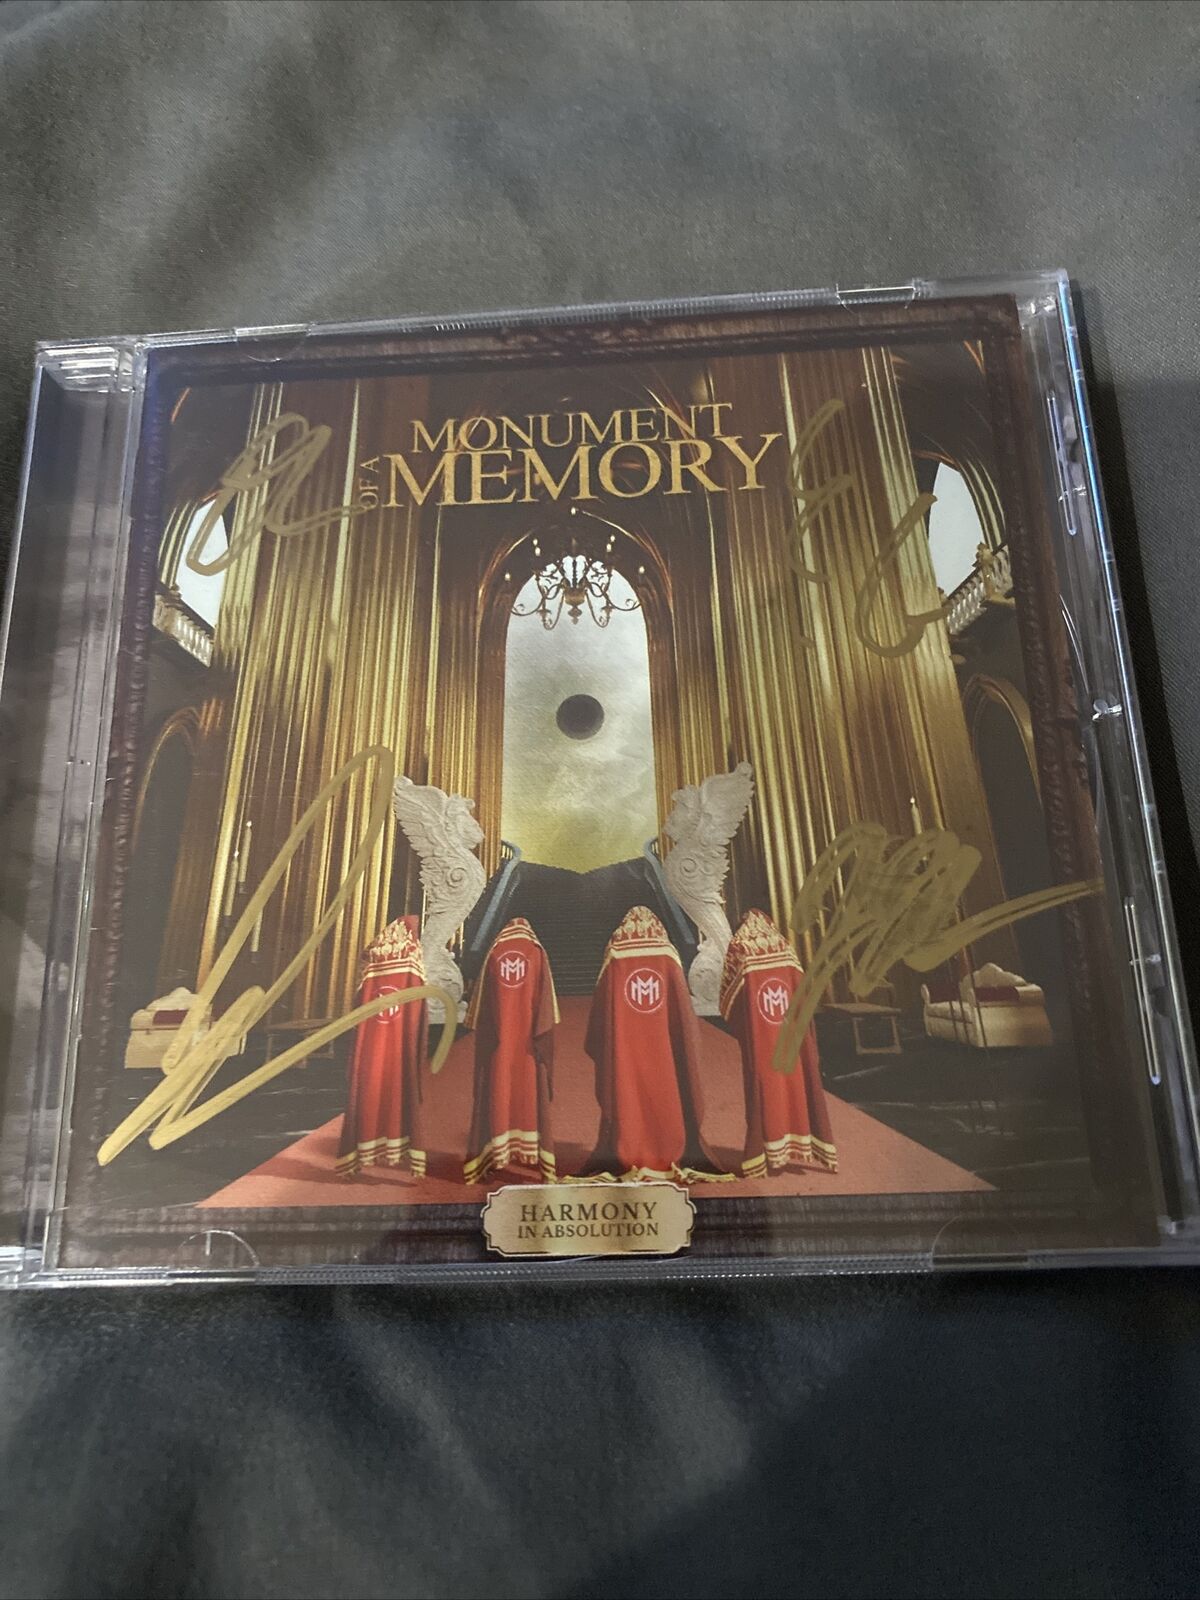 Signed By All 4 Monument Of A Memory Harmony In Absolution